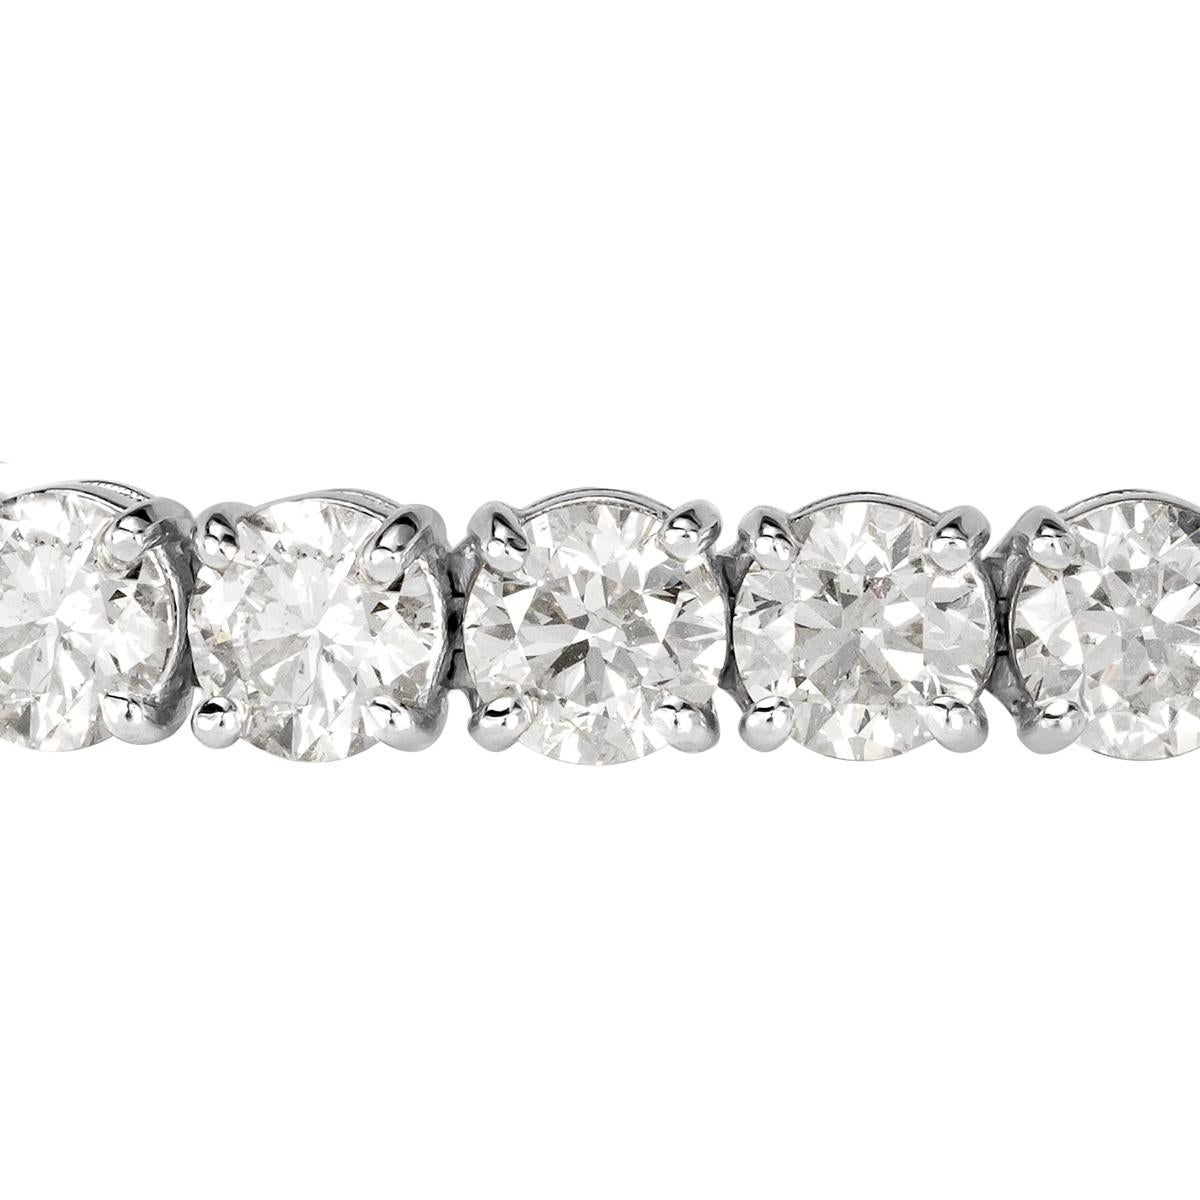 This exceptional diamond tennis bracelet showcases 22.07ct of peerless white round brilliant cut diamonds graded at F-G in color, SI1-SI2 in clarity. They are set in a classic 18k white gold, four-prong setting style. Each of the diamonds average